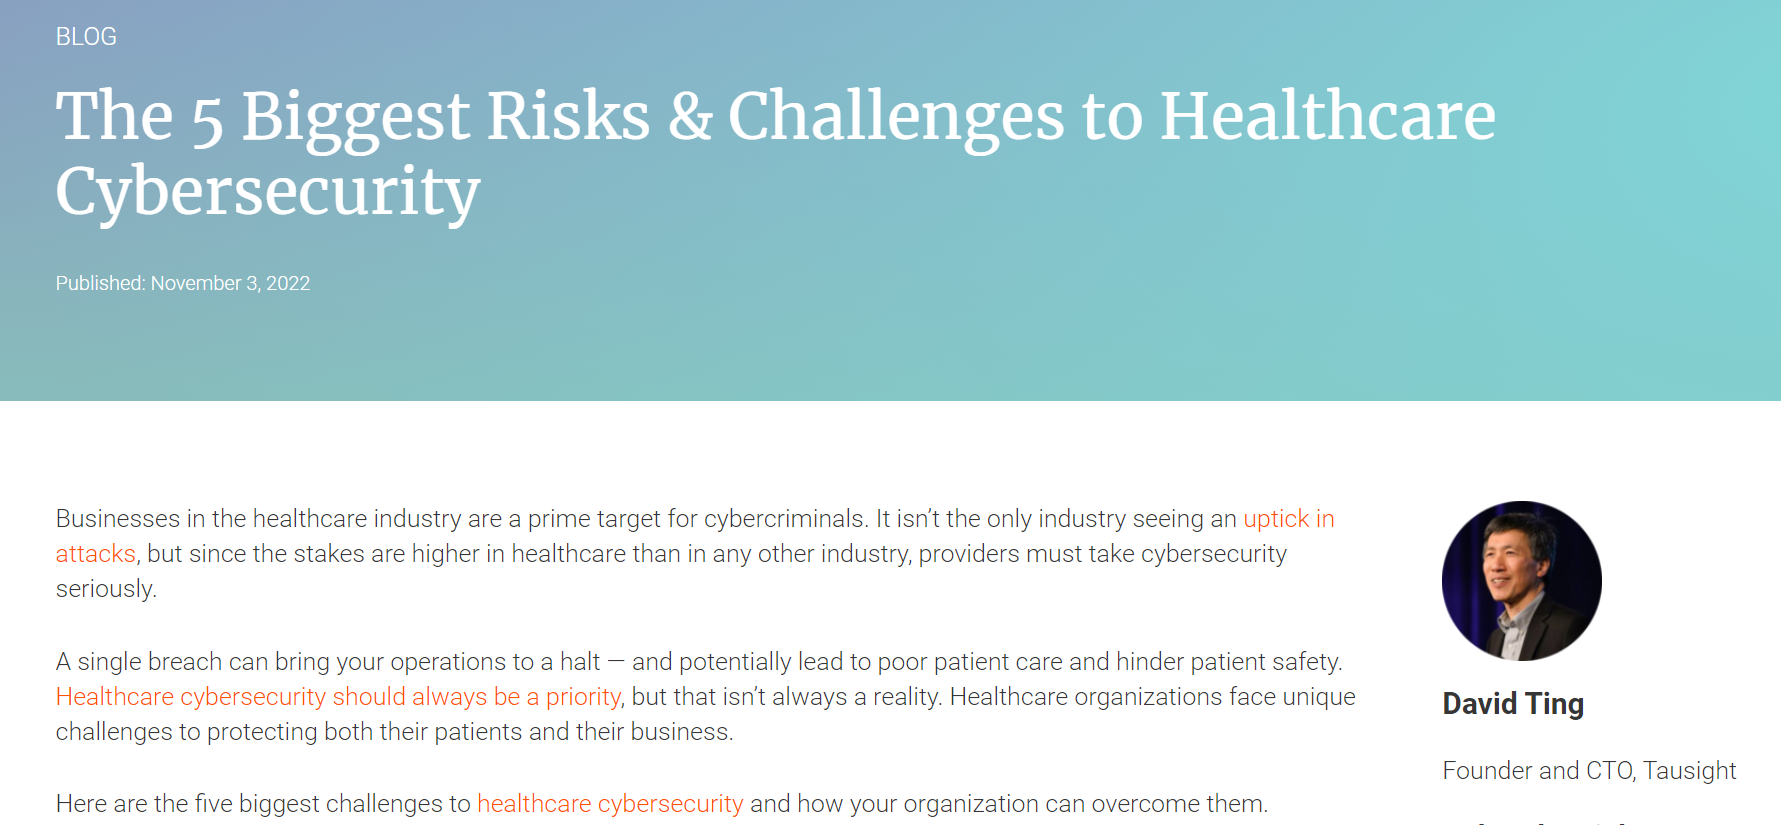 The 5 Biggest Risks & Challenges to Healthcare Cybersecurity